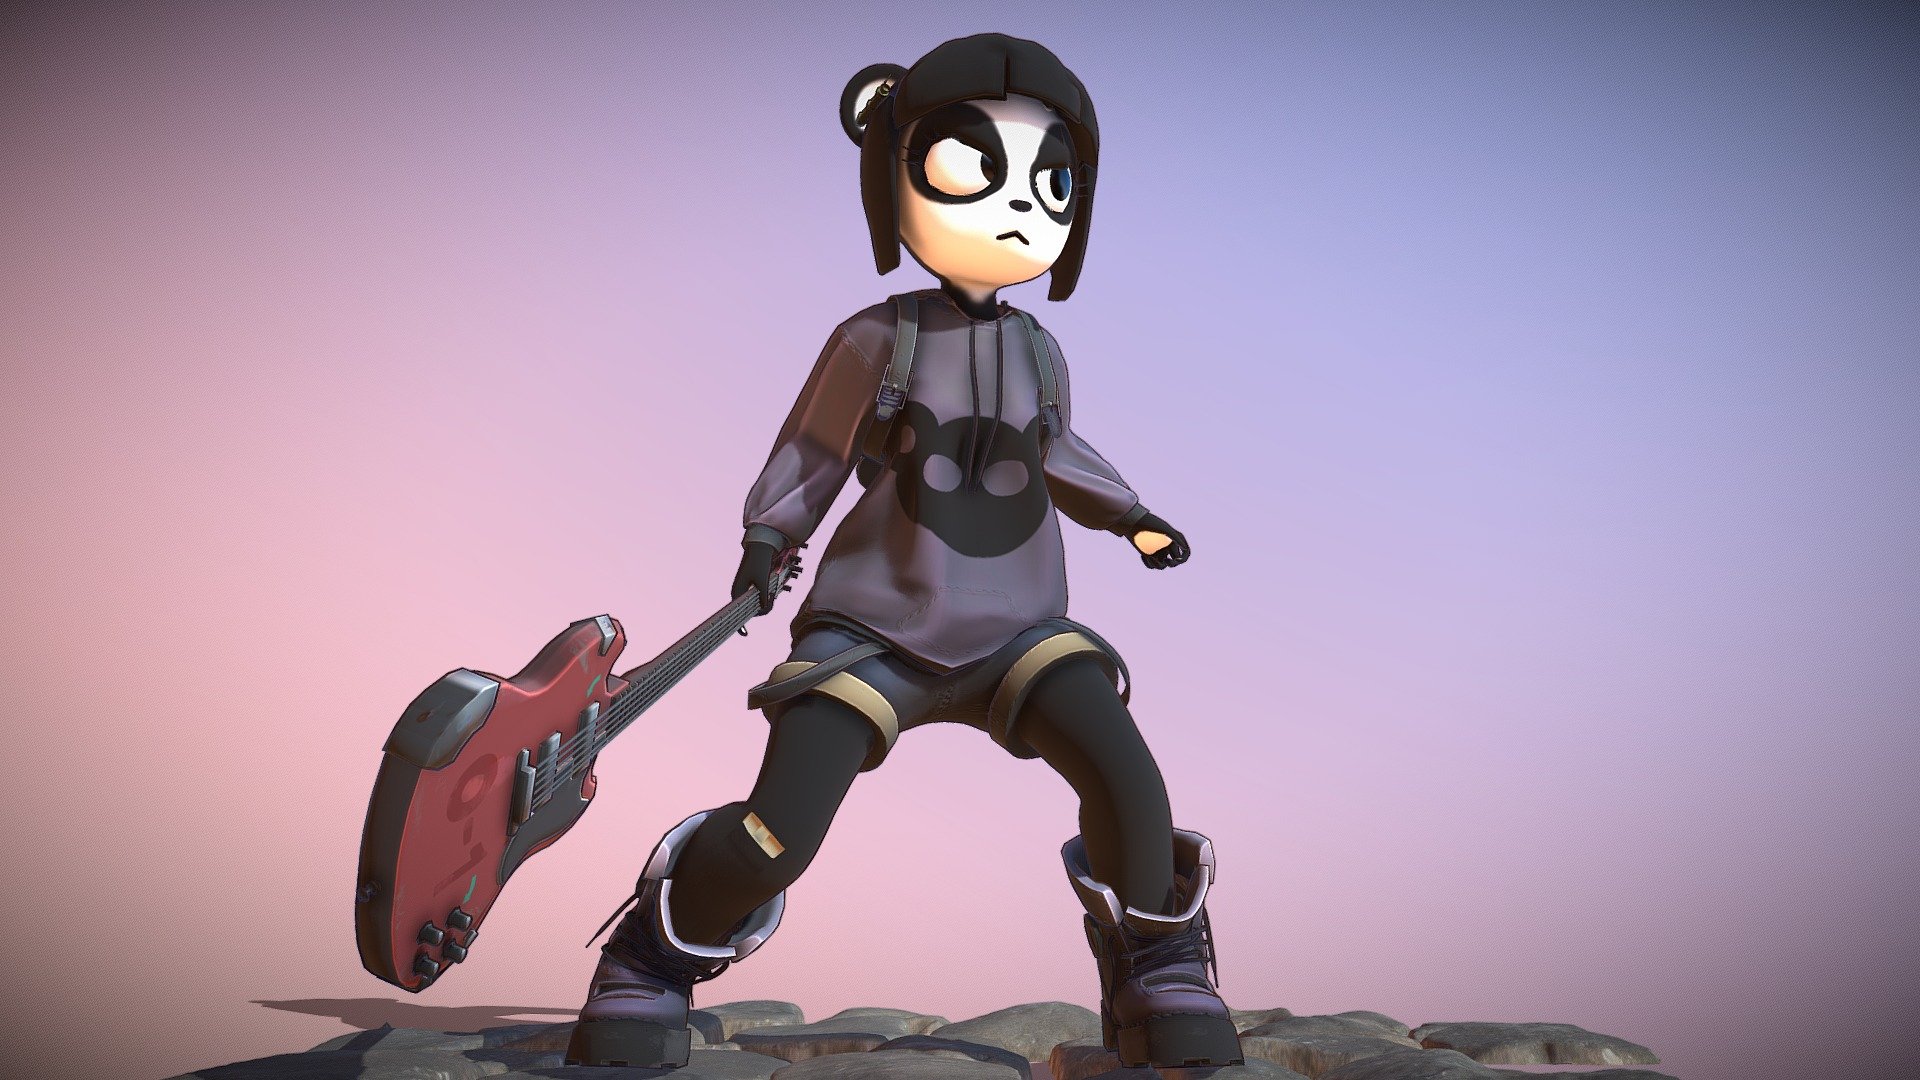 Just another original character. Blender+Substance Painter. Stylized textures + AO and normal maps so lighting can do it's work(hold Alt while draging mouse to rotate environment light). 

Added animation!

Download for free here - https://sketchfab.com/3d-models/panda-girl-stylizedfree-blender-rig-40c2bbc4c79d4ed8b8da5f0381d97168 - Panda Girl - Stylized - 3D model by futaba@blender (@futaba_blender) 3d model